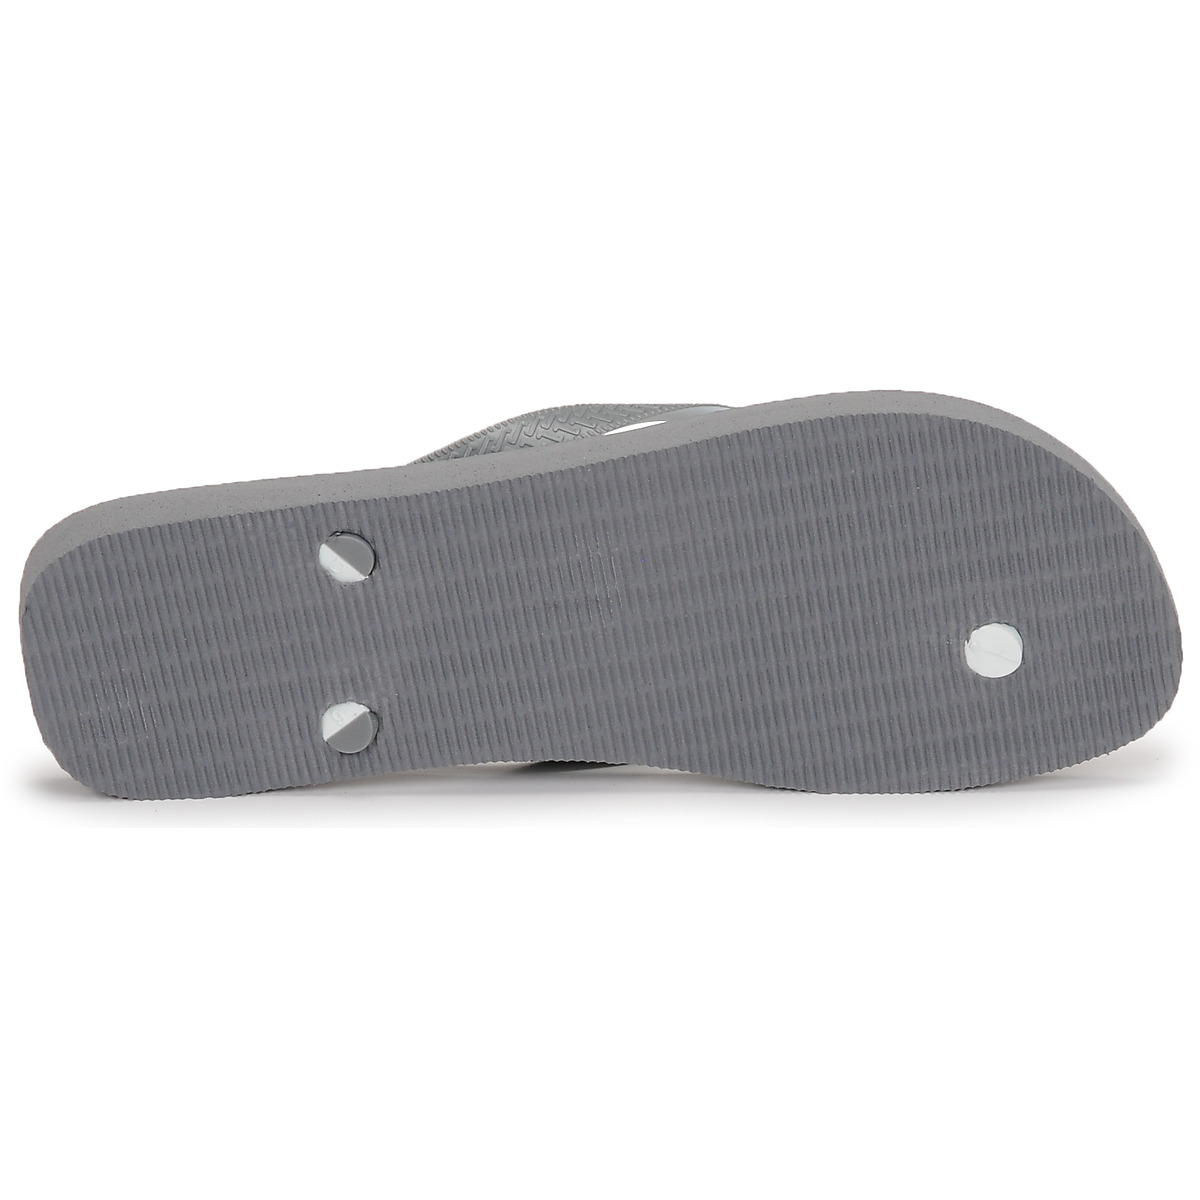 Havaianas Gris TOP MIX Uk5a62aE